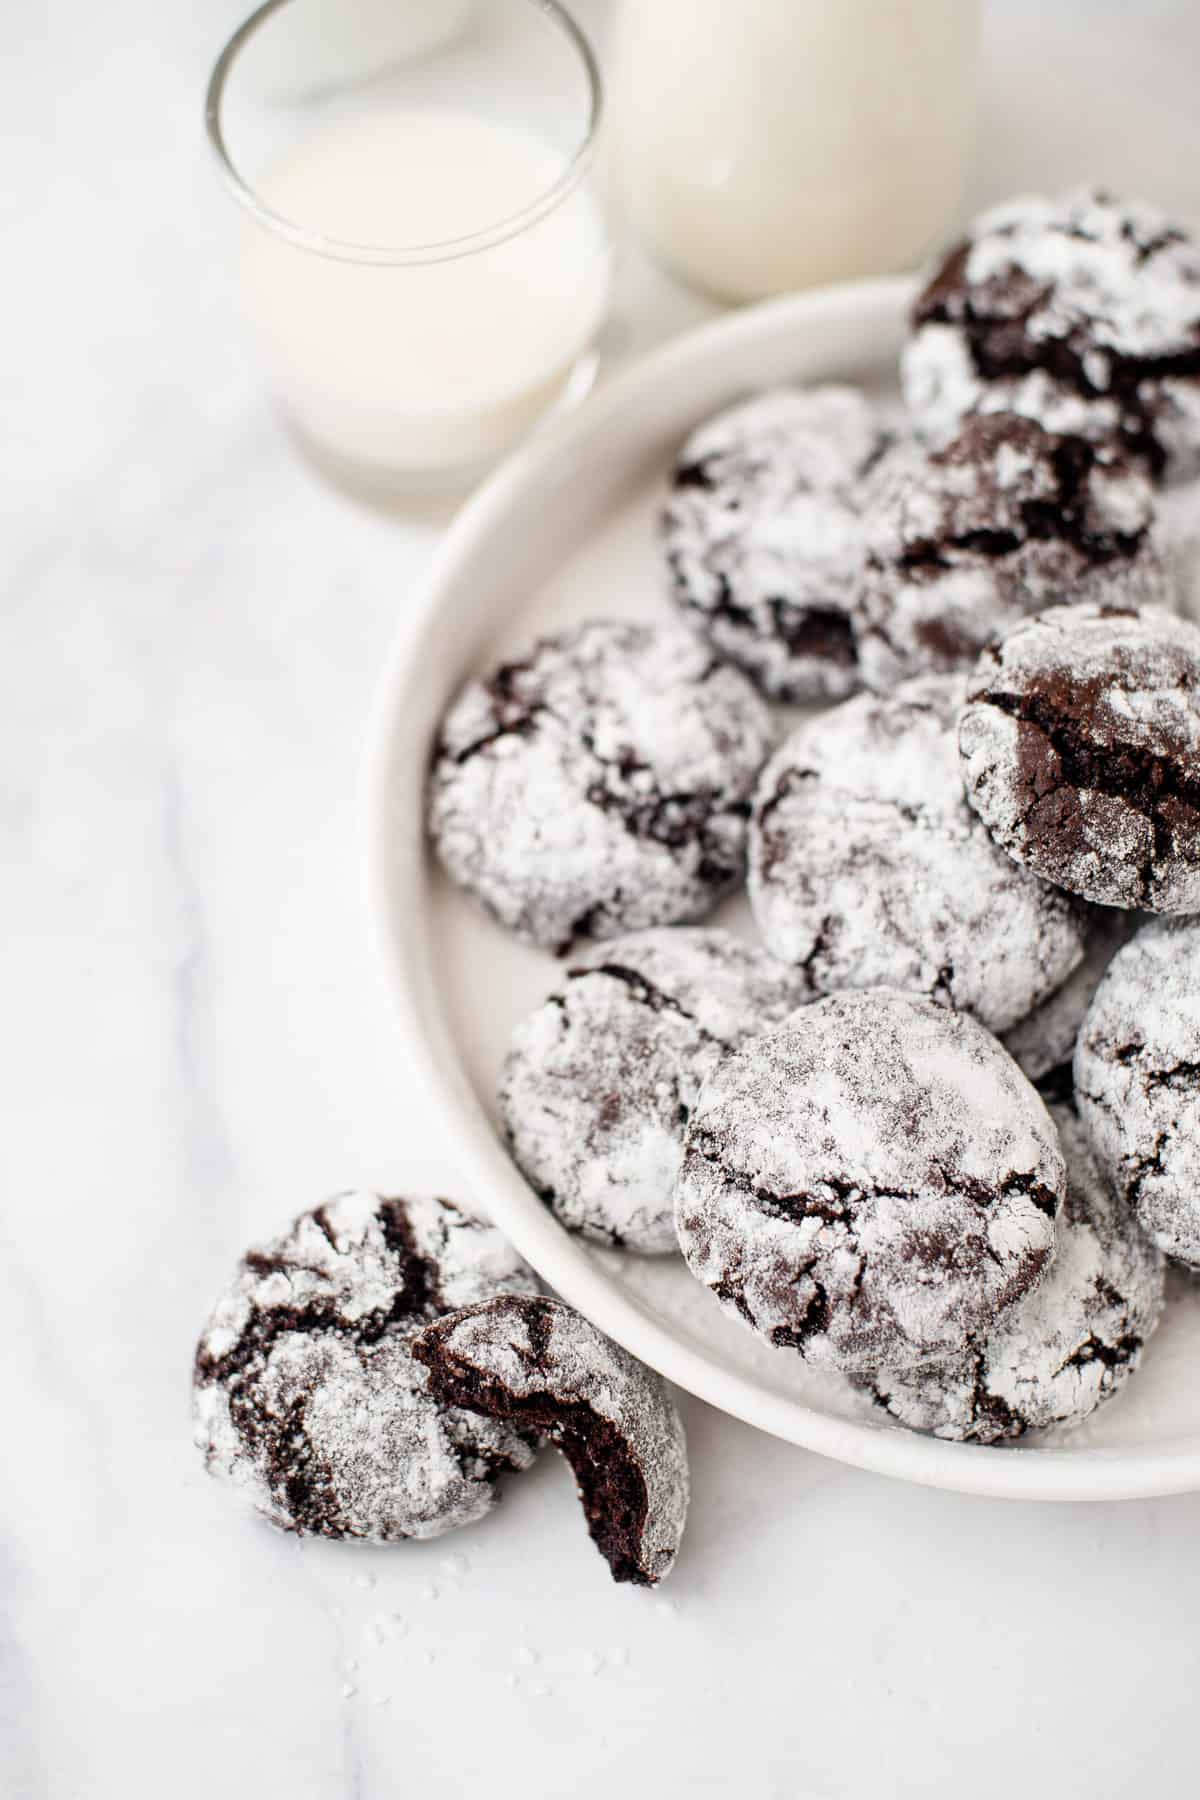 chocolate crinkles served on a white round plate with two cookies sitting next to the plate on a marble countertop